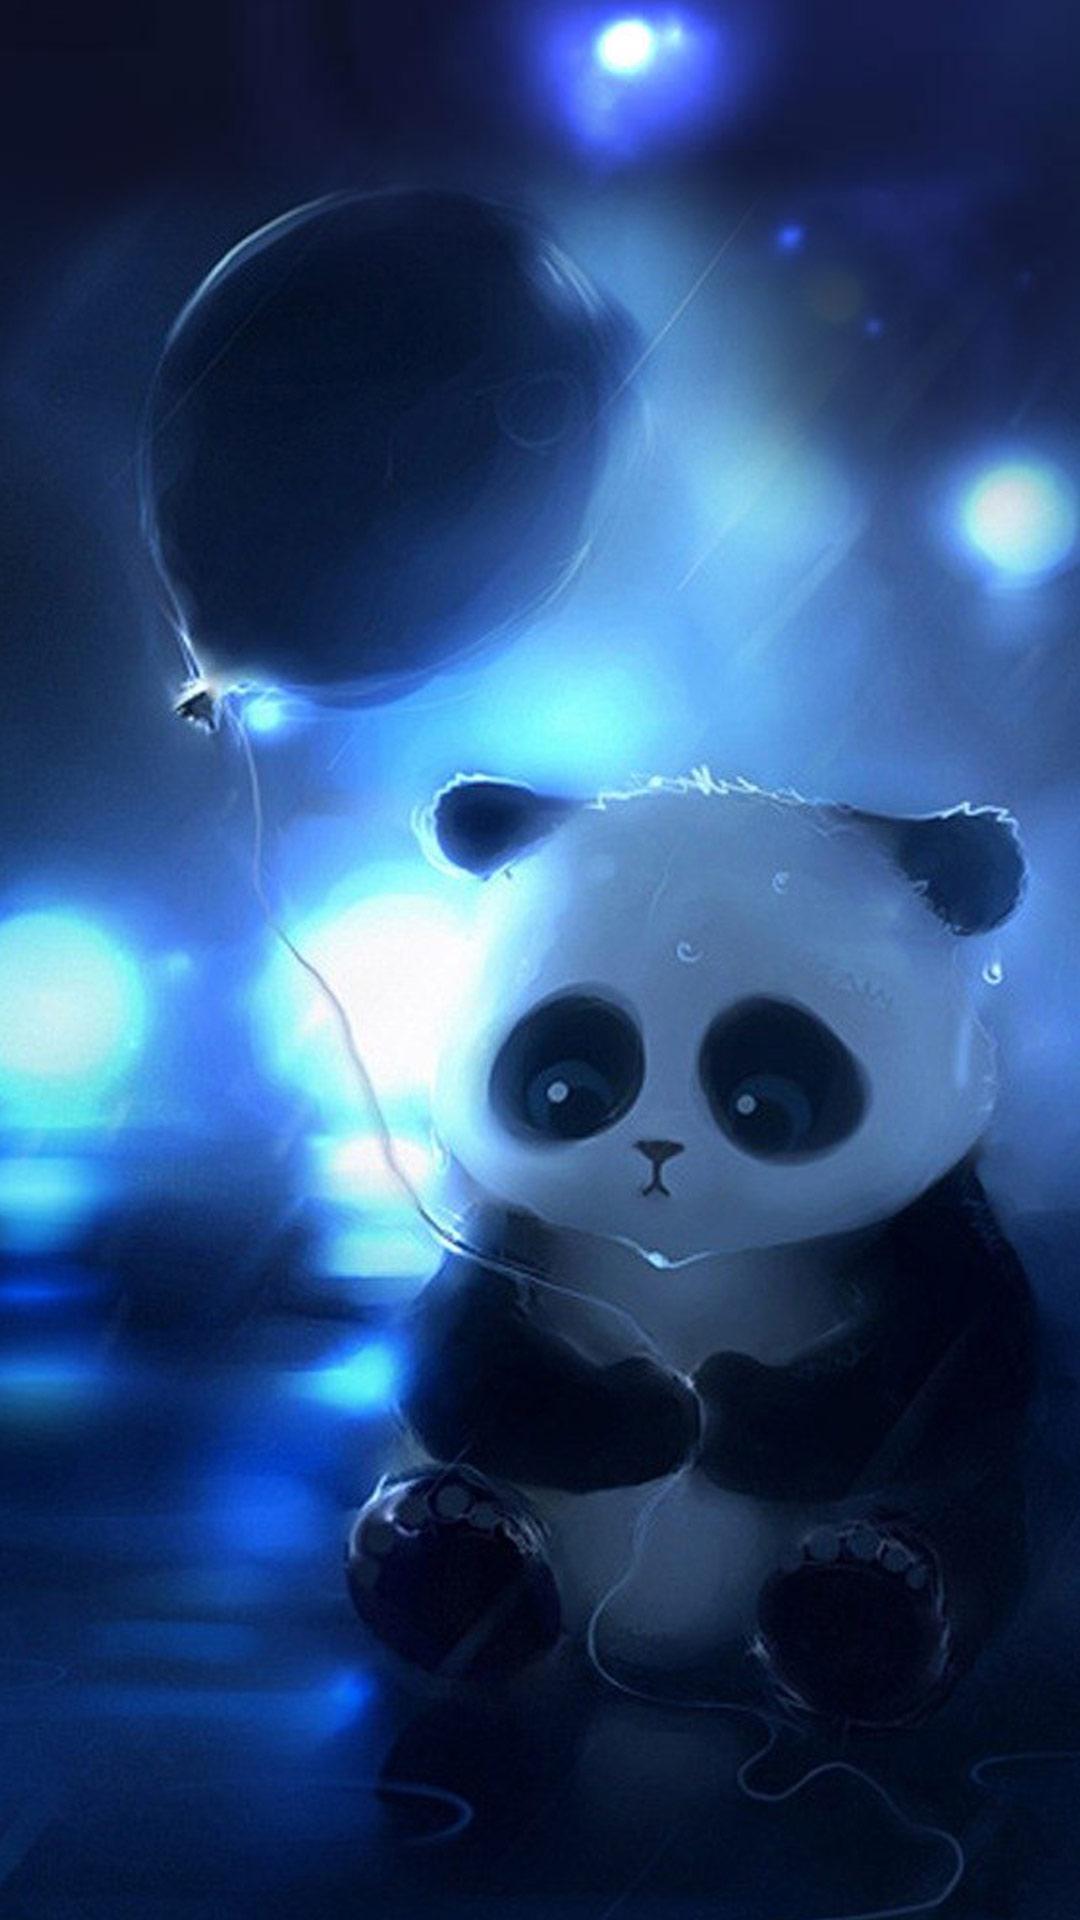 Cute baby panda live wallpaper for Android